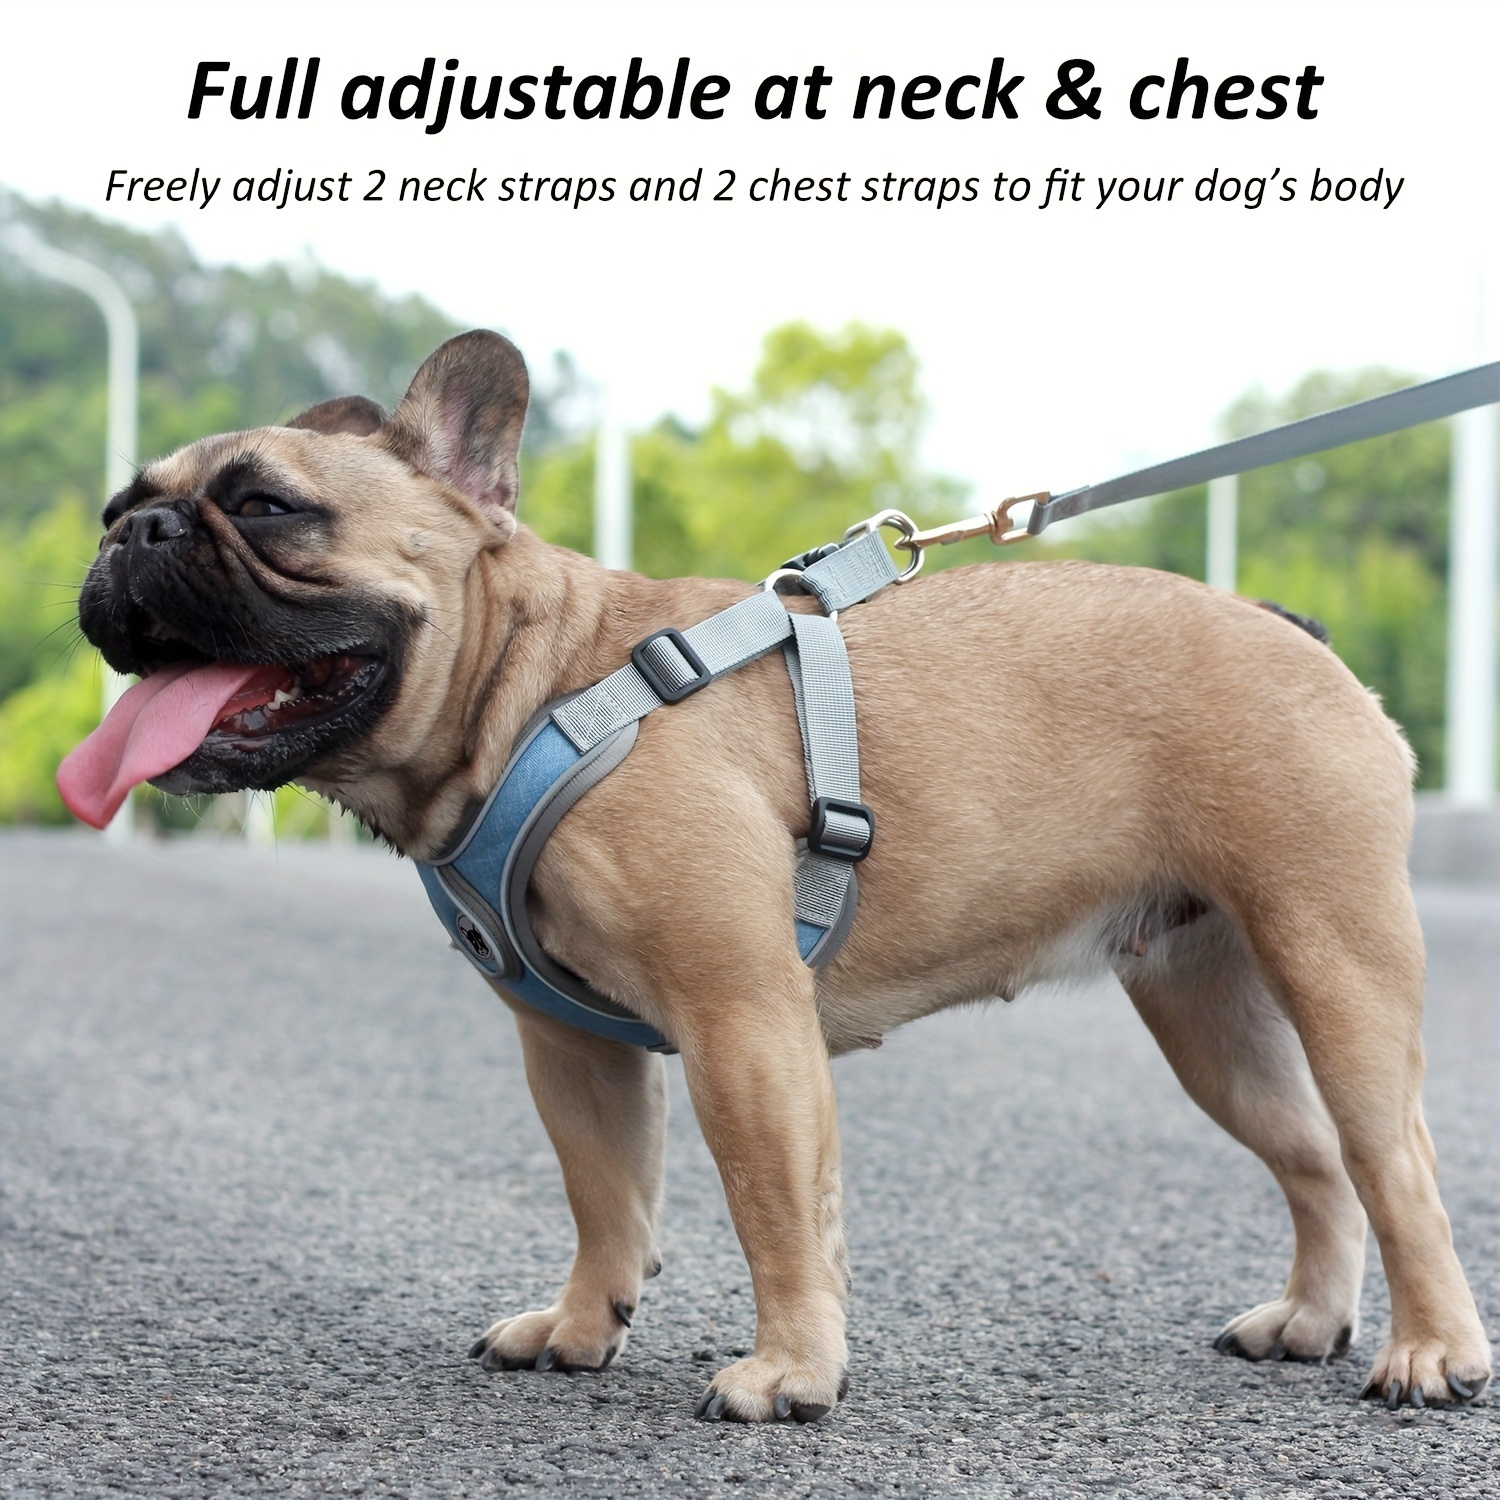 

Reflective Dog Harness And Leash Set - Easy Control And Adjustable For Small To Medium Dogs - Enhance Safety And Comfort